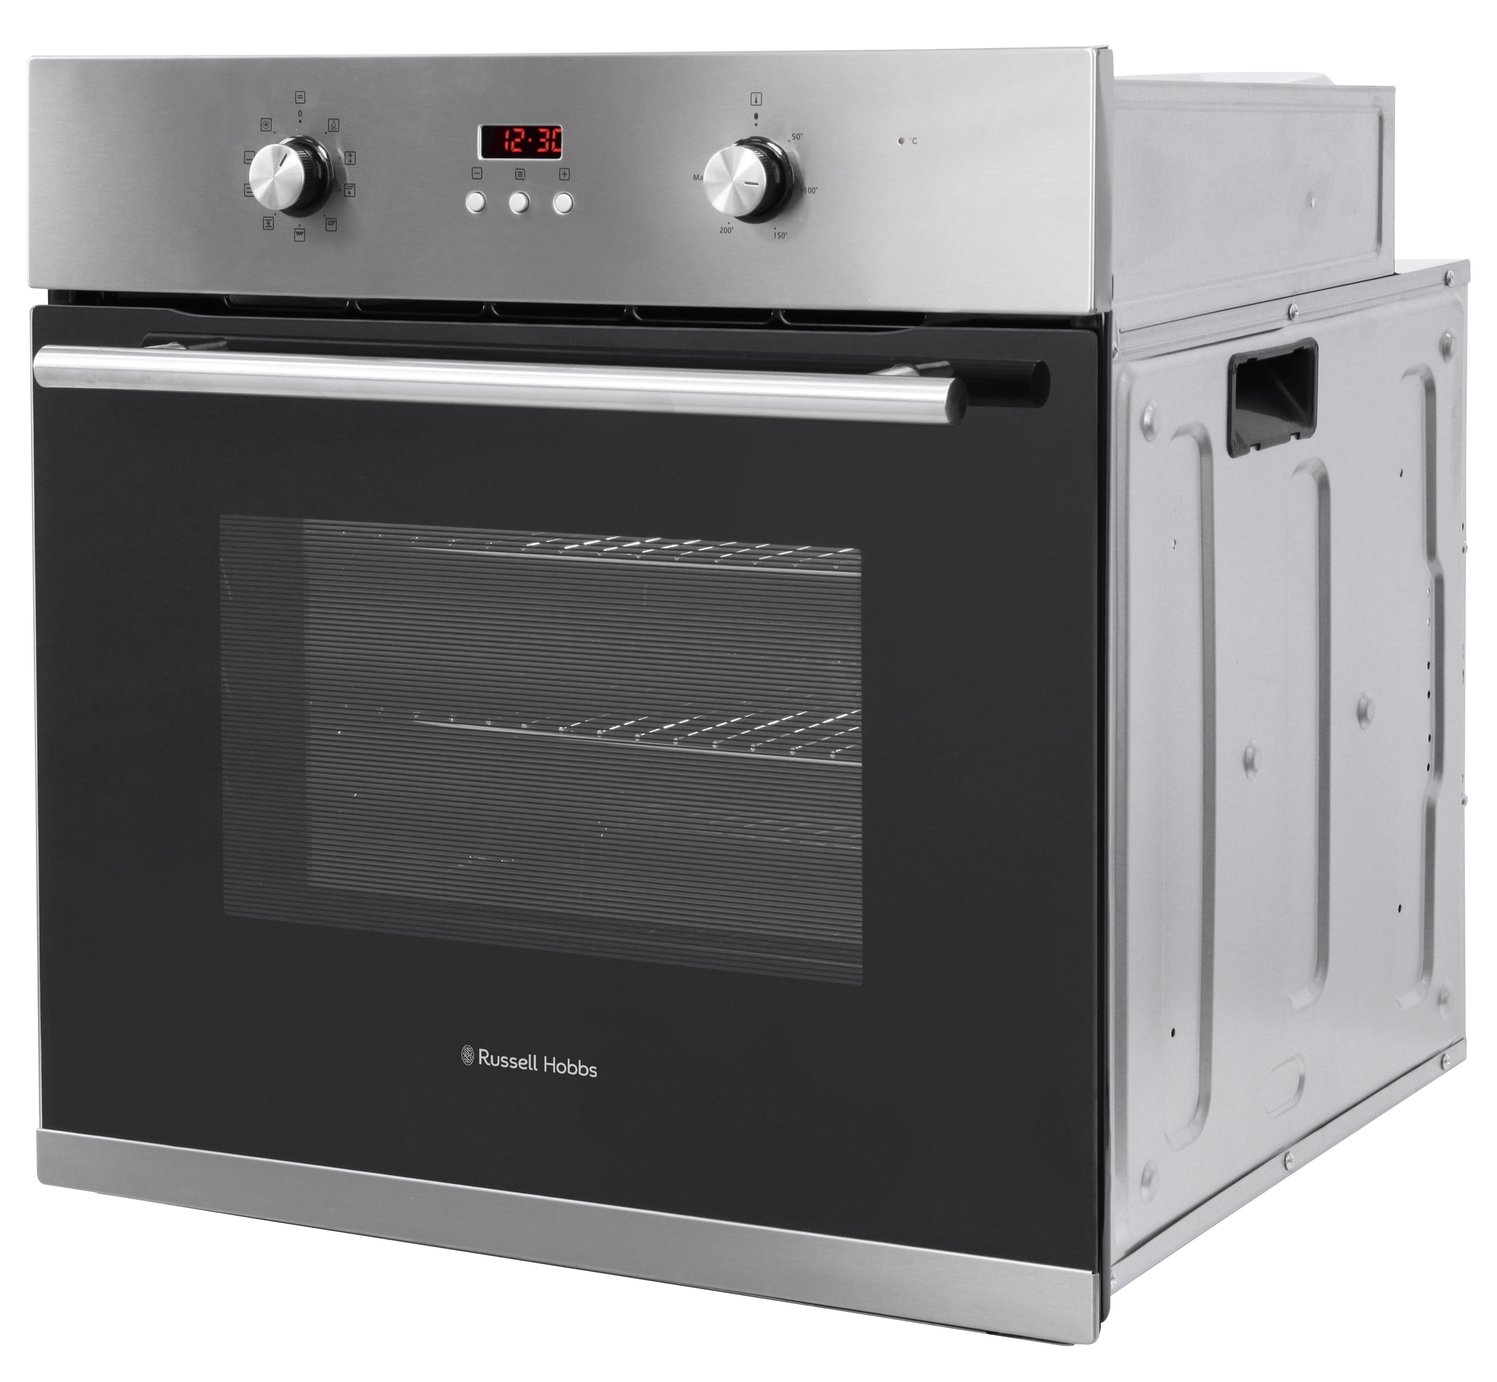 Russell Hobbs RHEO6501SS Built In Electric Oven Review